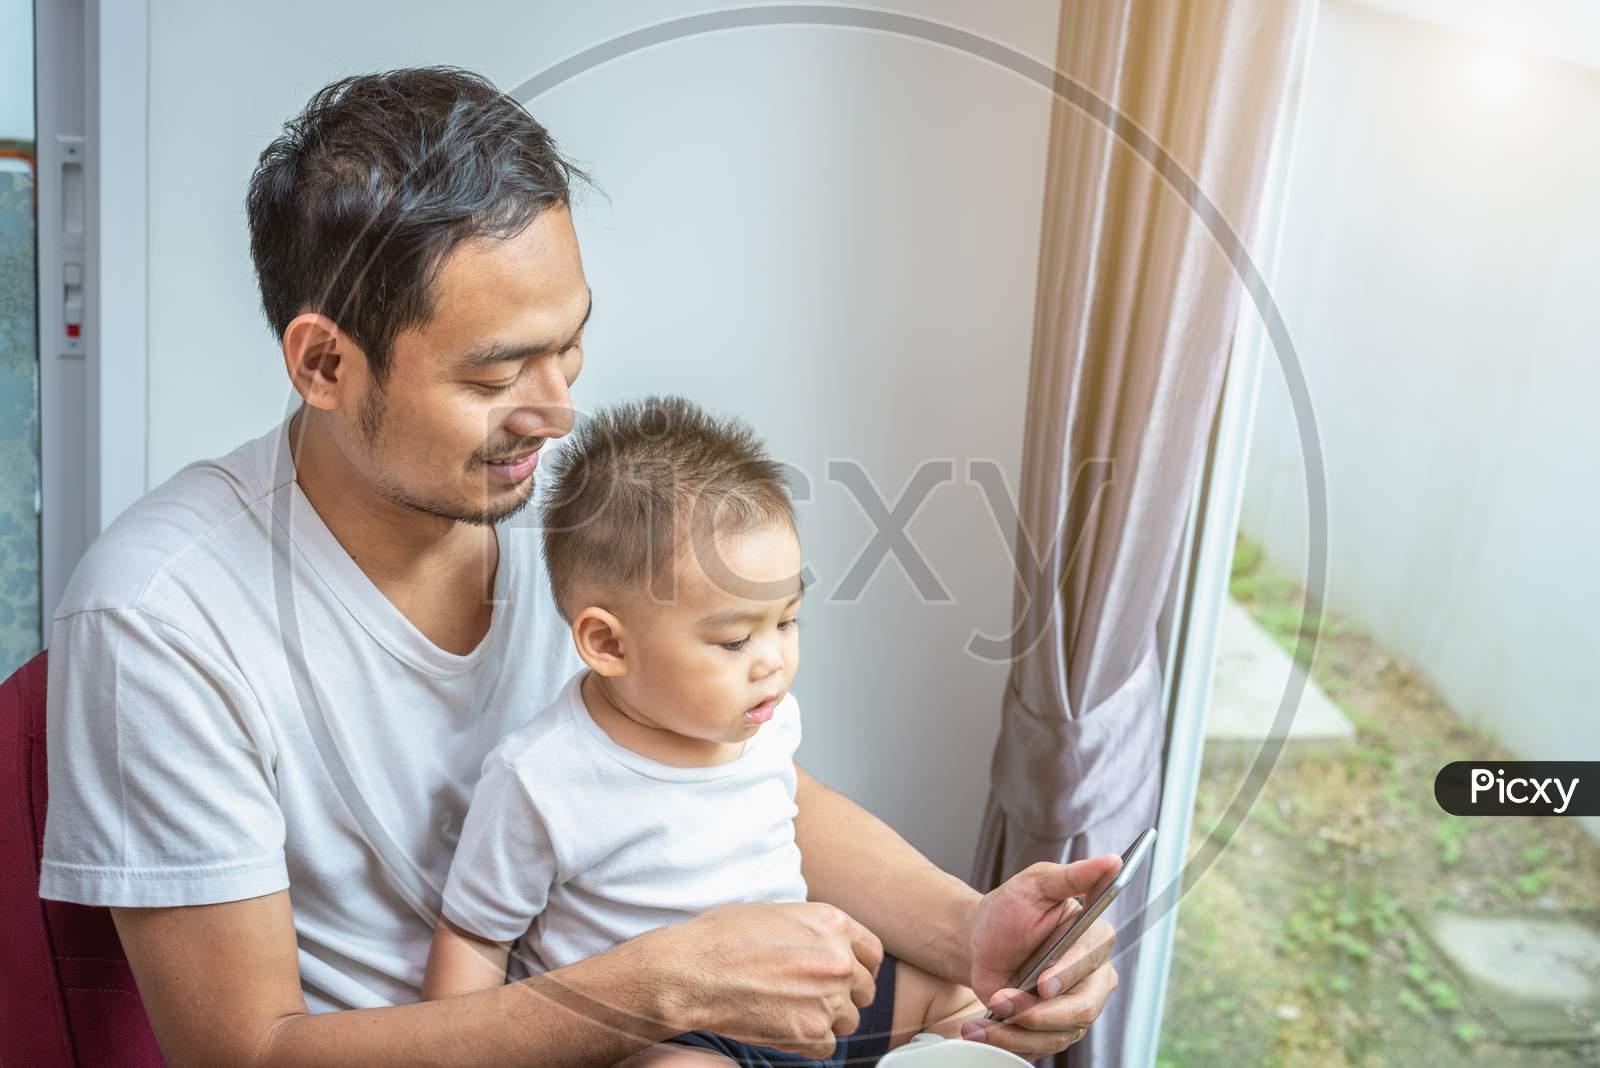 Asian Father And Son Using Smart Phone Together In Home Background. Technology And People Concept. Lifestyles And Happy Family Theme. Internet And Communication Theme